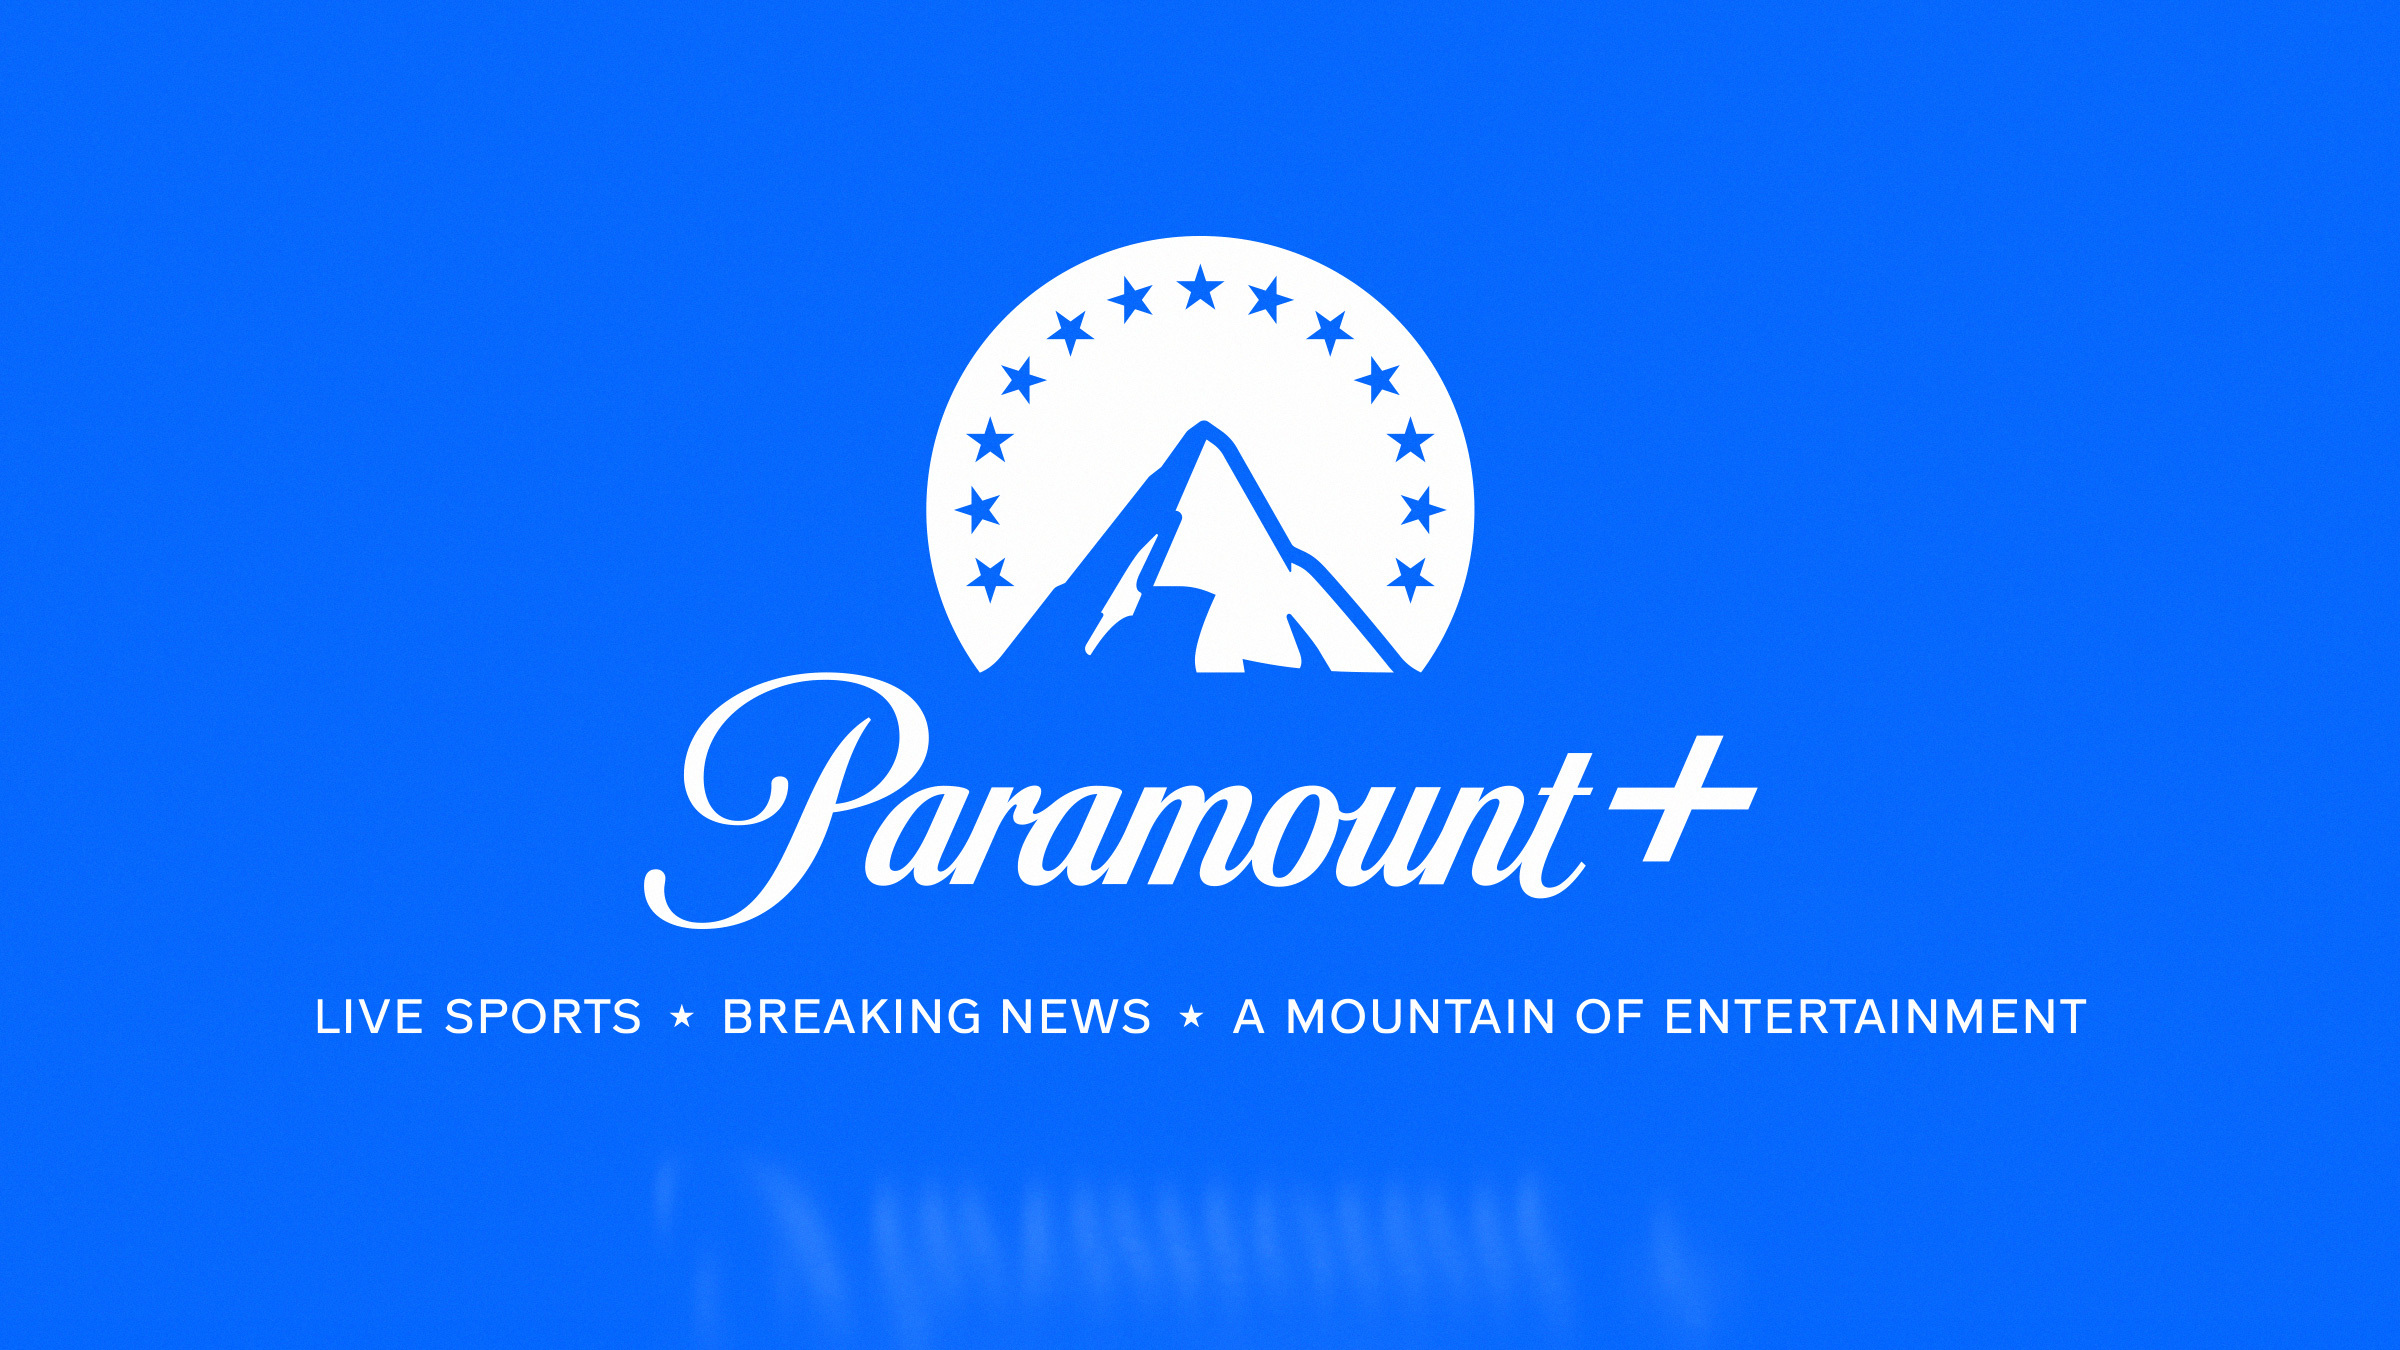 Halo' TV Series Moves to Paramount Plus From Showtime